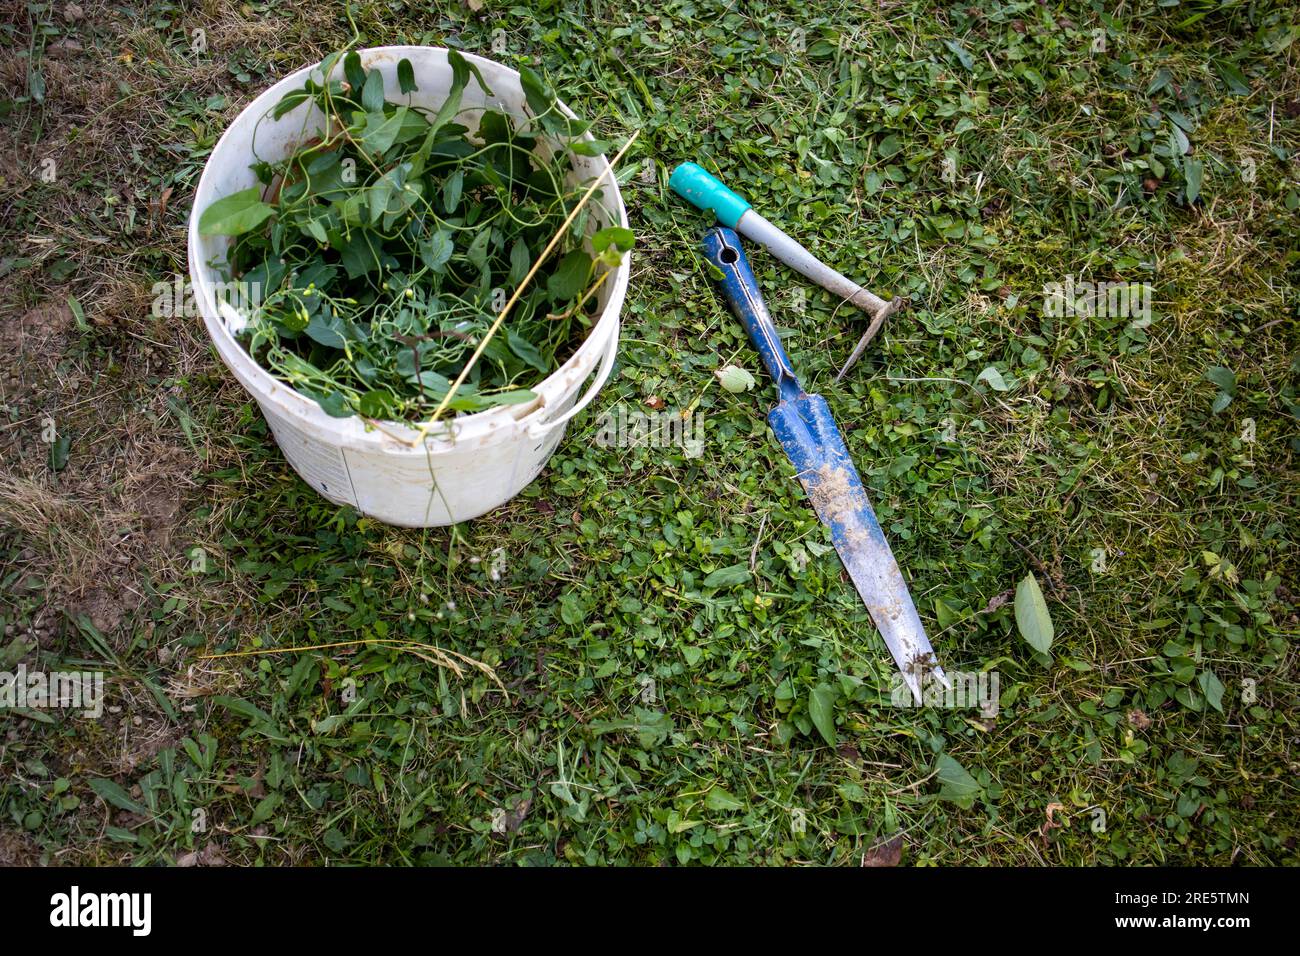 Metal tools and a bucket with weeds Stock Photo